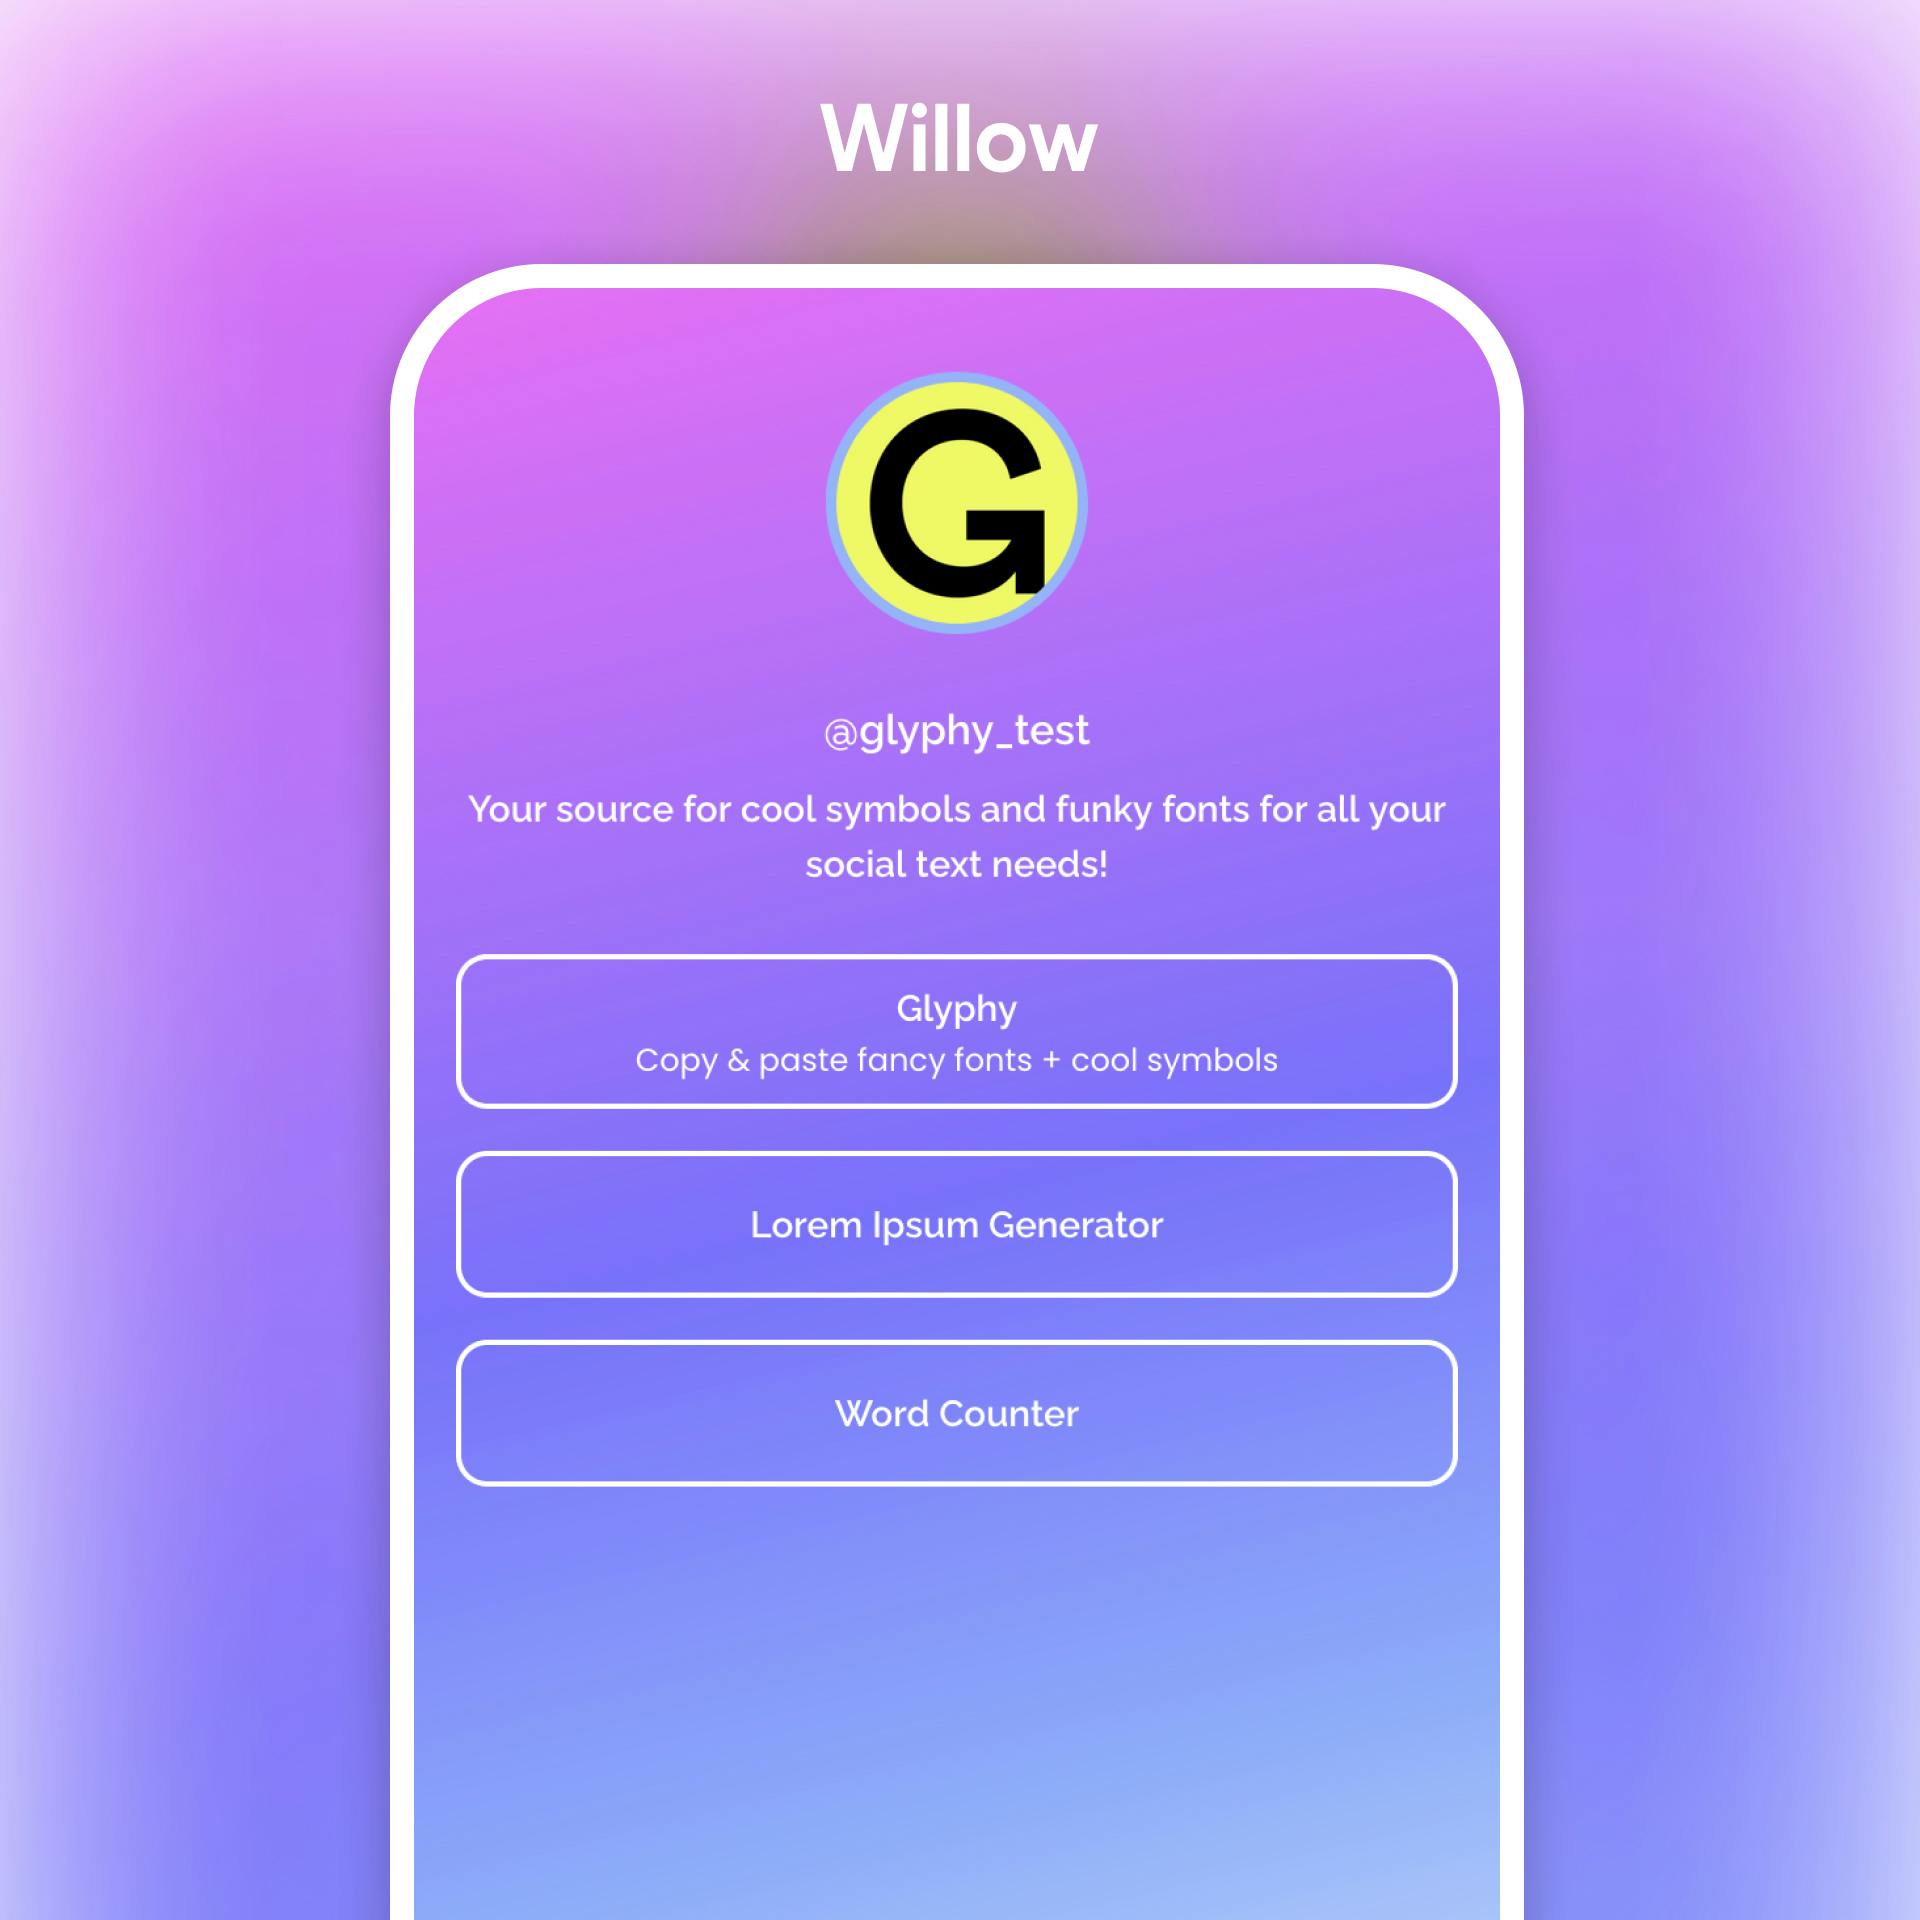 Willow link in bio tool example profile on a mobile device